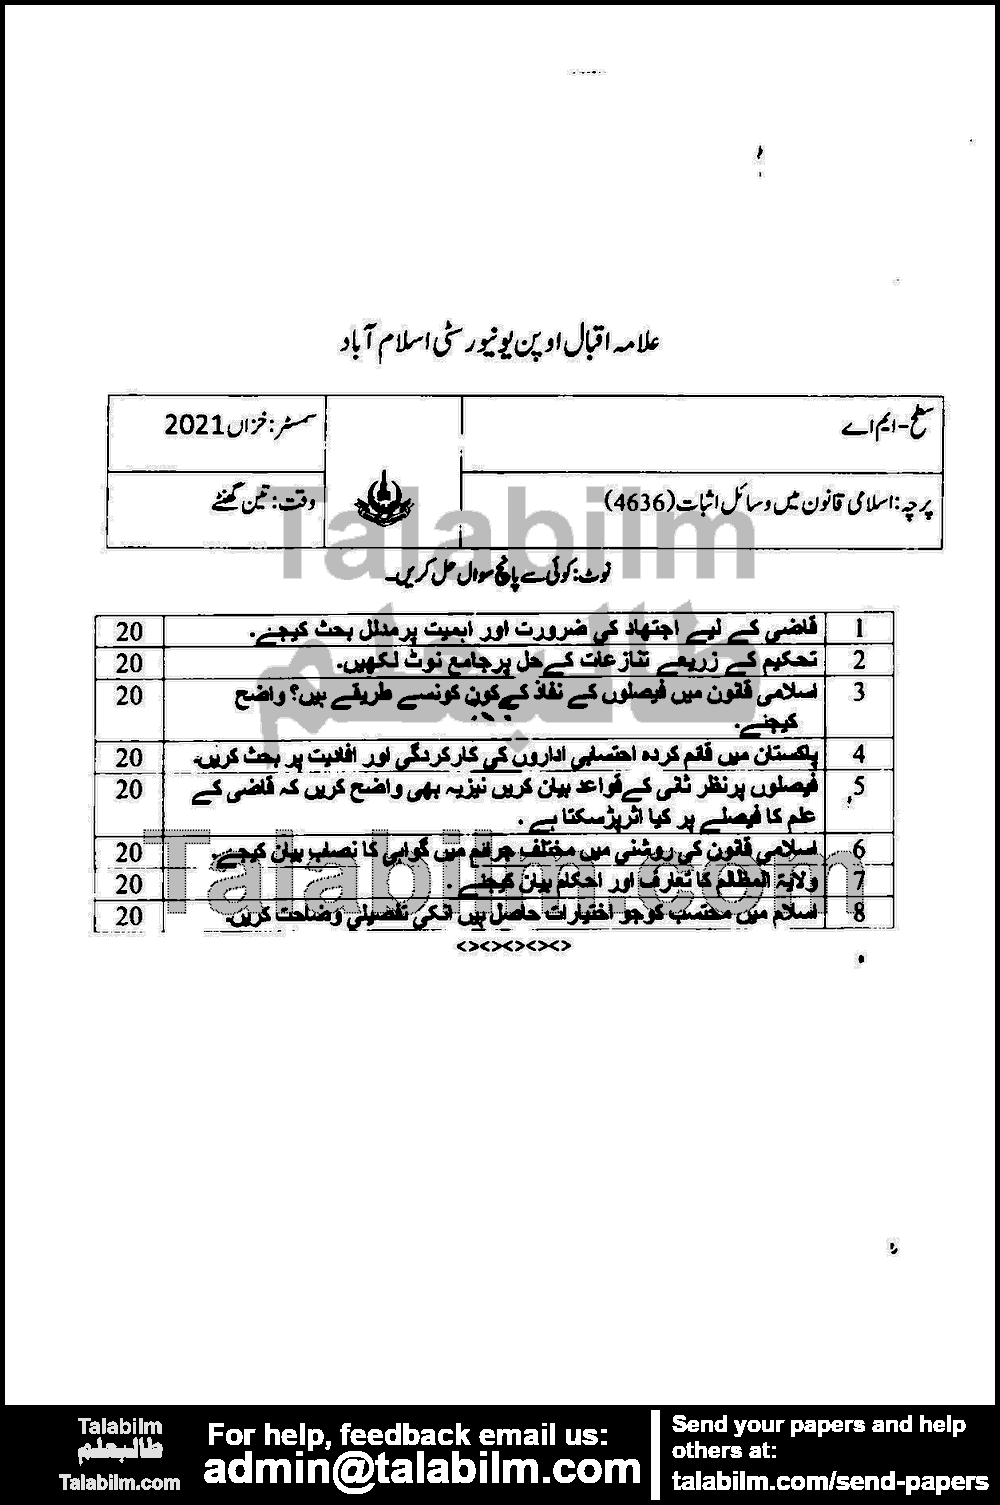 Wasail-e-Isbat and Ehtisab in Islamic Law 4636 past paper for Autumn 2021